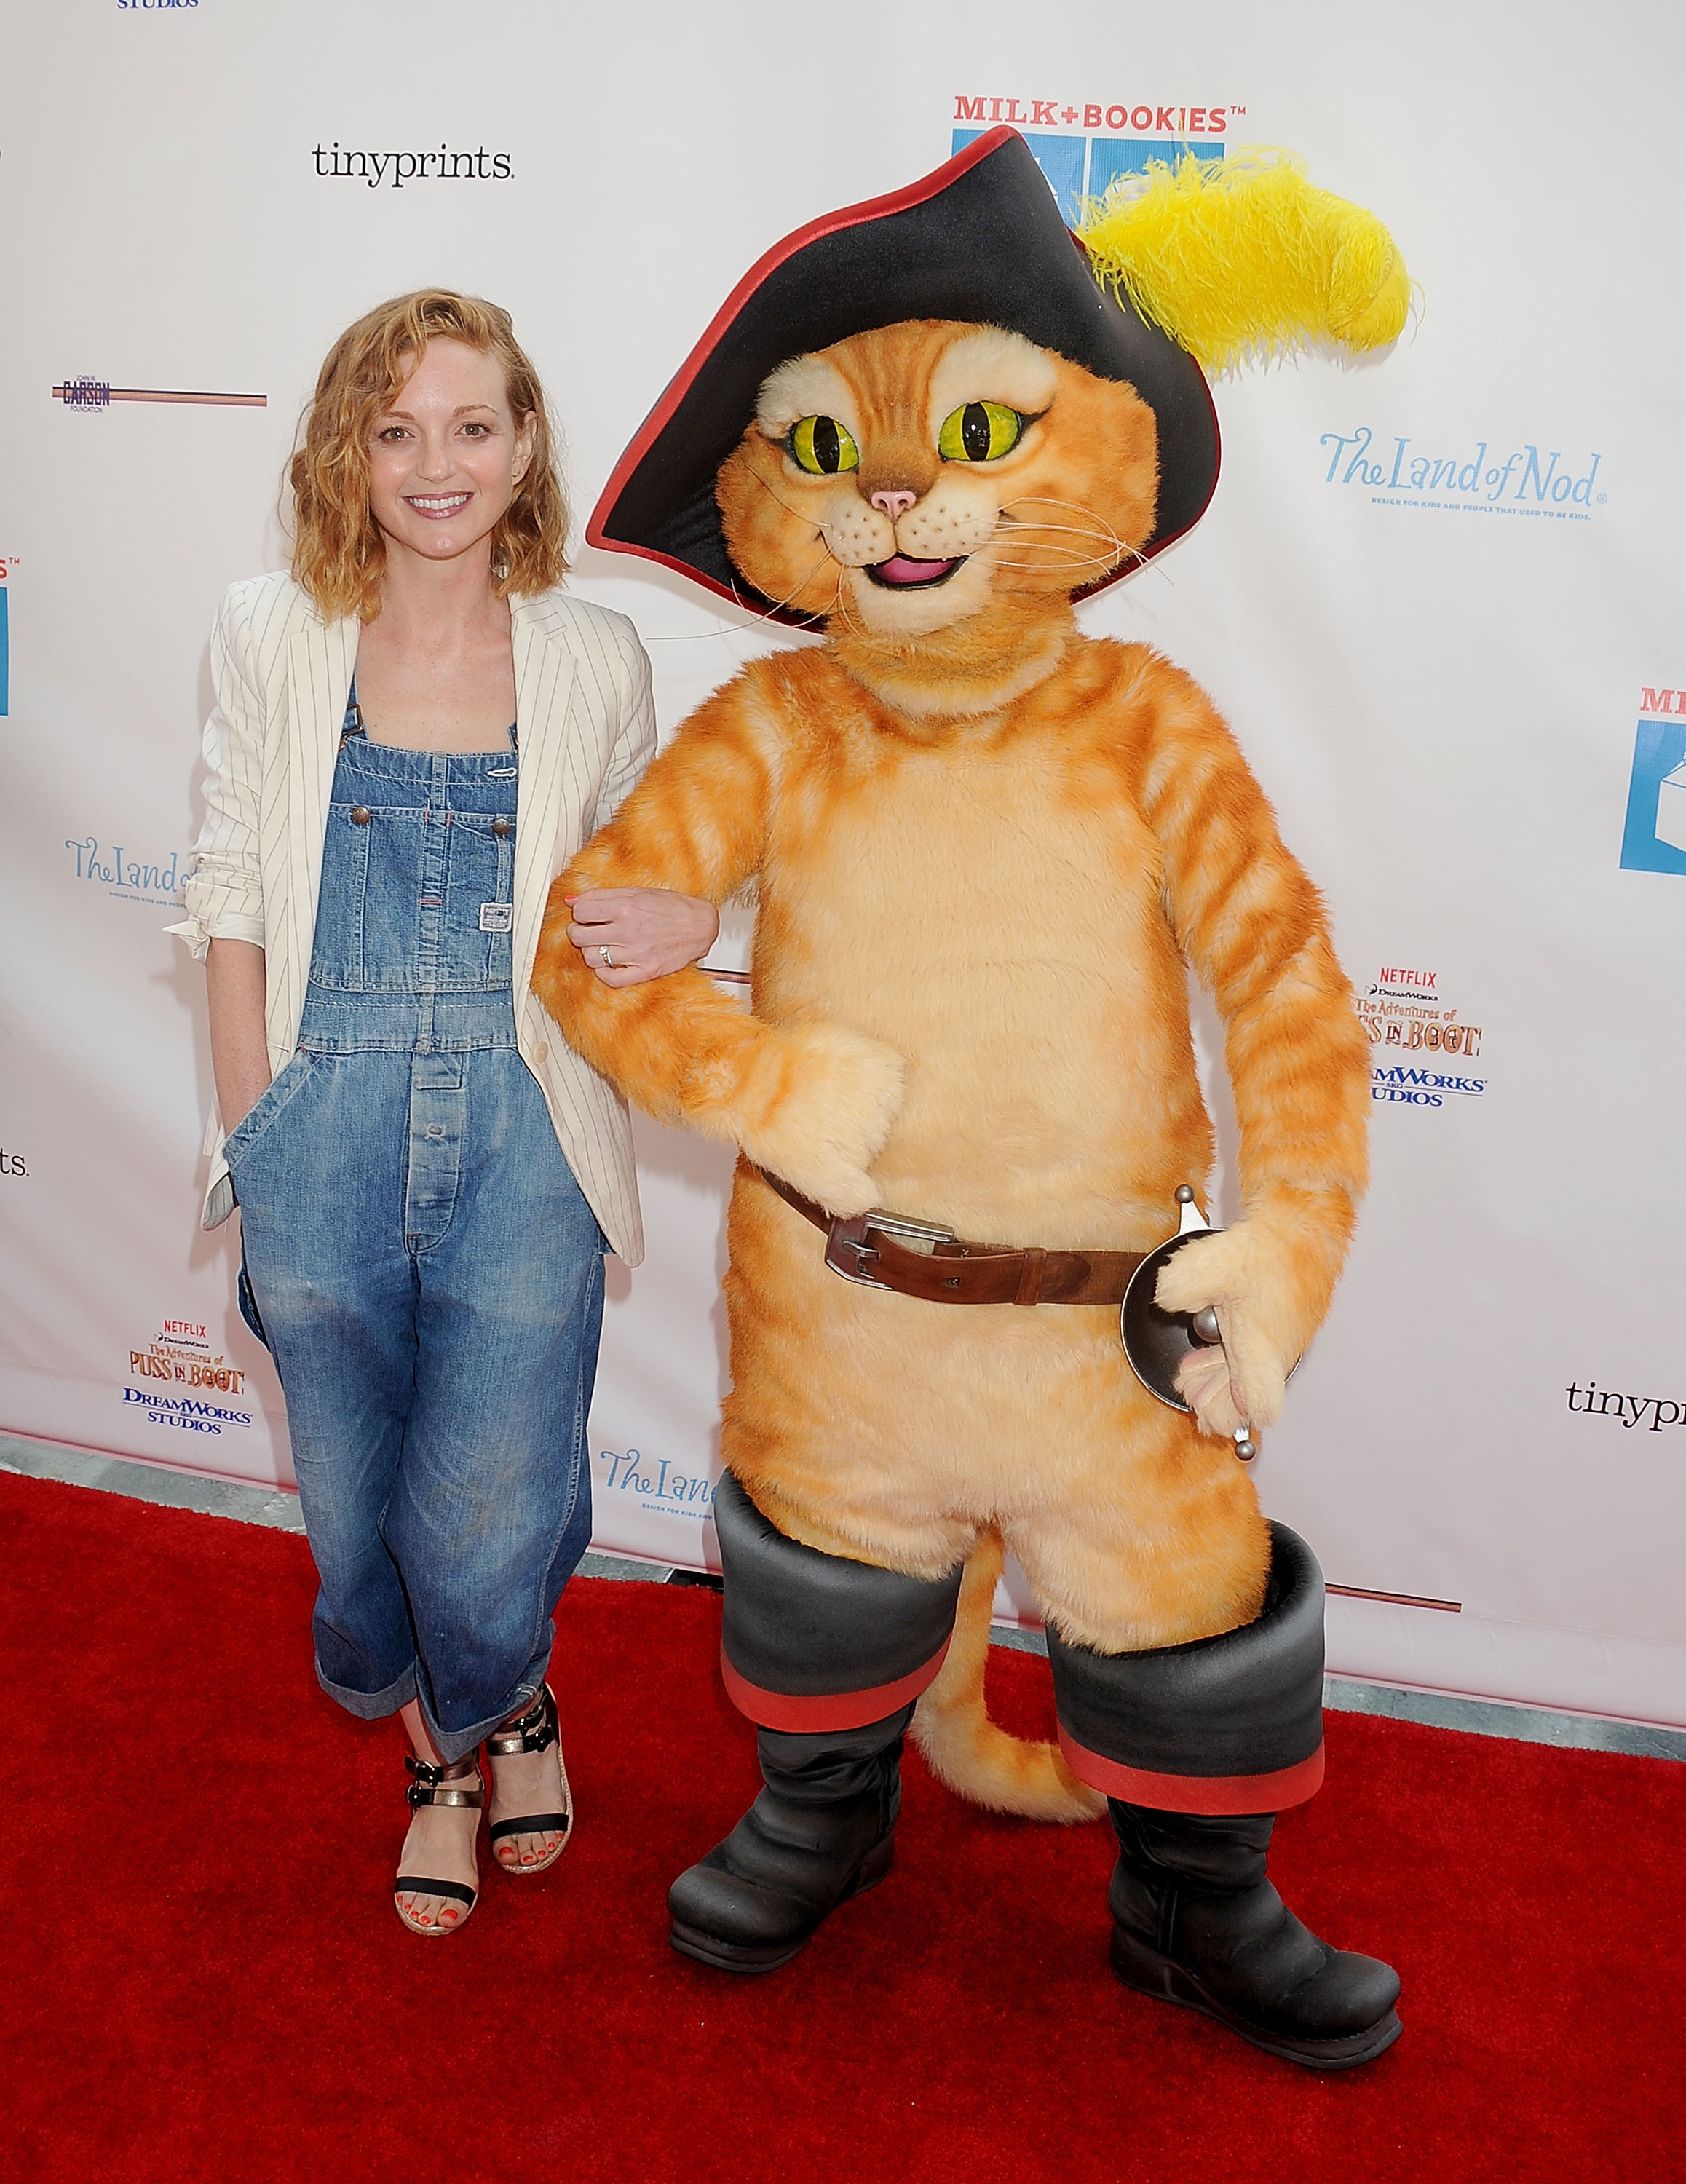 Jayma Mays arrives at the Milk + Bookies 10th Annual Story Time Celebration at Skirball Cultural Center on April 19, 2015 in Los Angeles, California. (Gregg DeGuire&mdash;Getty Images)